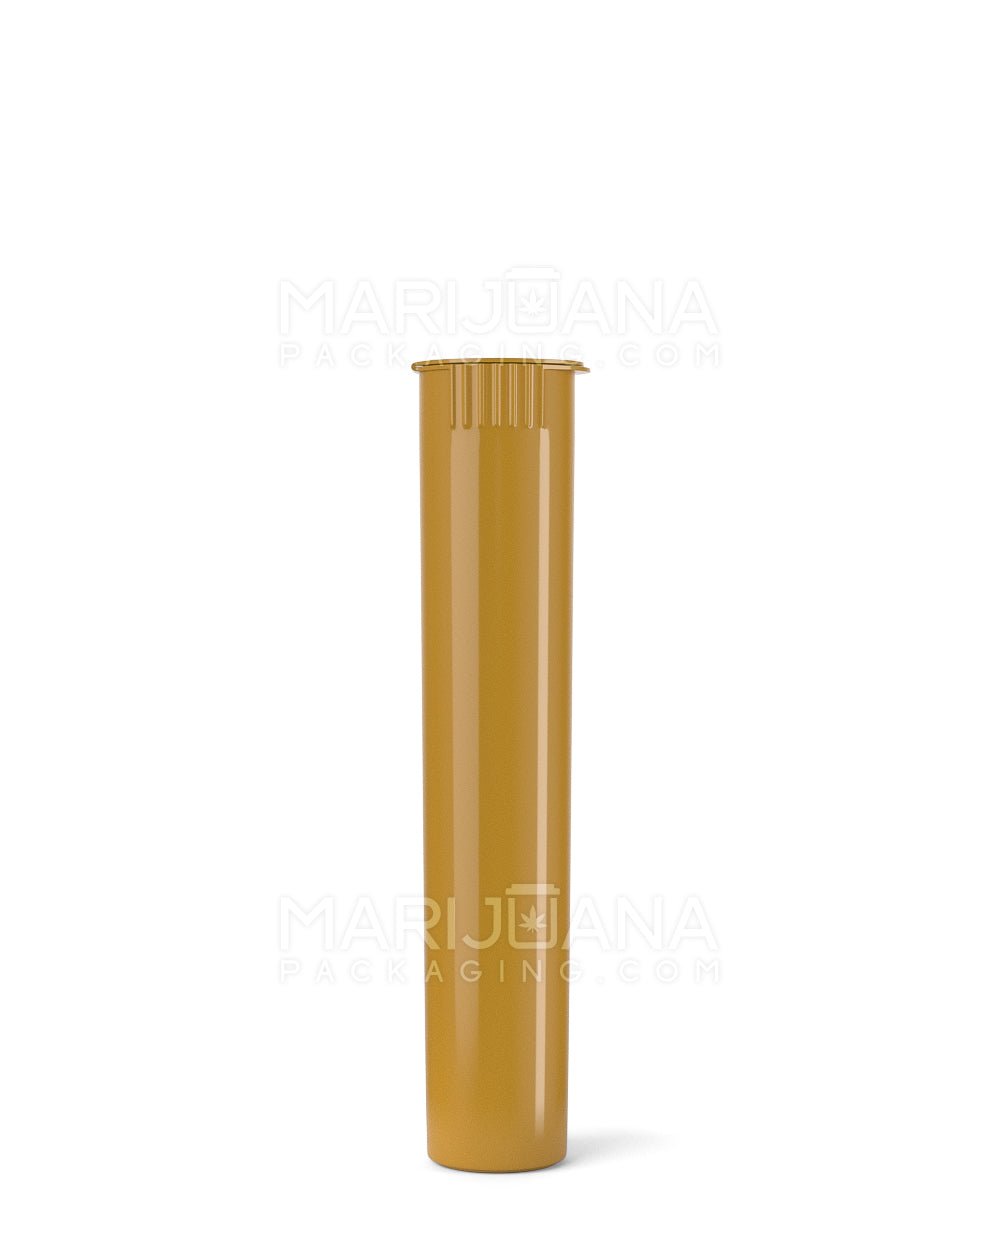 Child Resistant | Pop Top Opaque Plastic Pre-Roll Tubes | 95mm - Gold - 1000 Count - 2